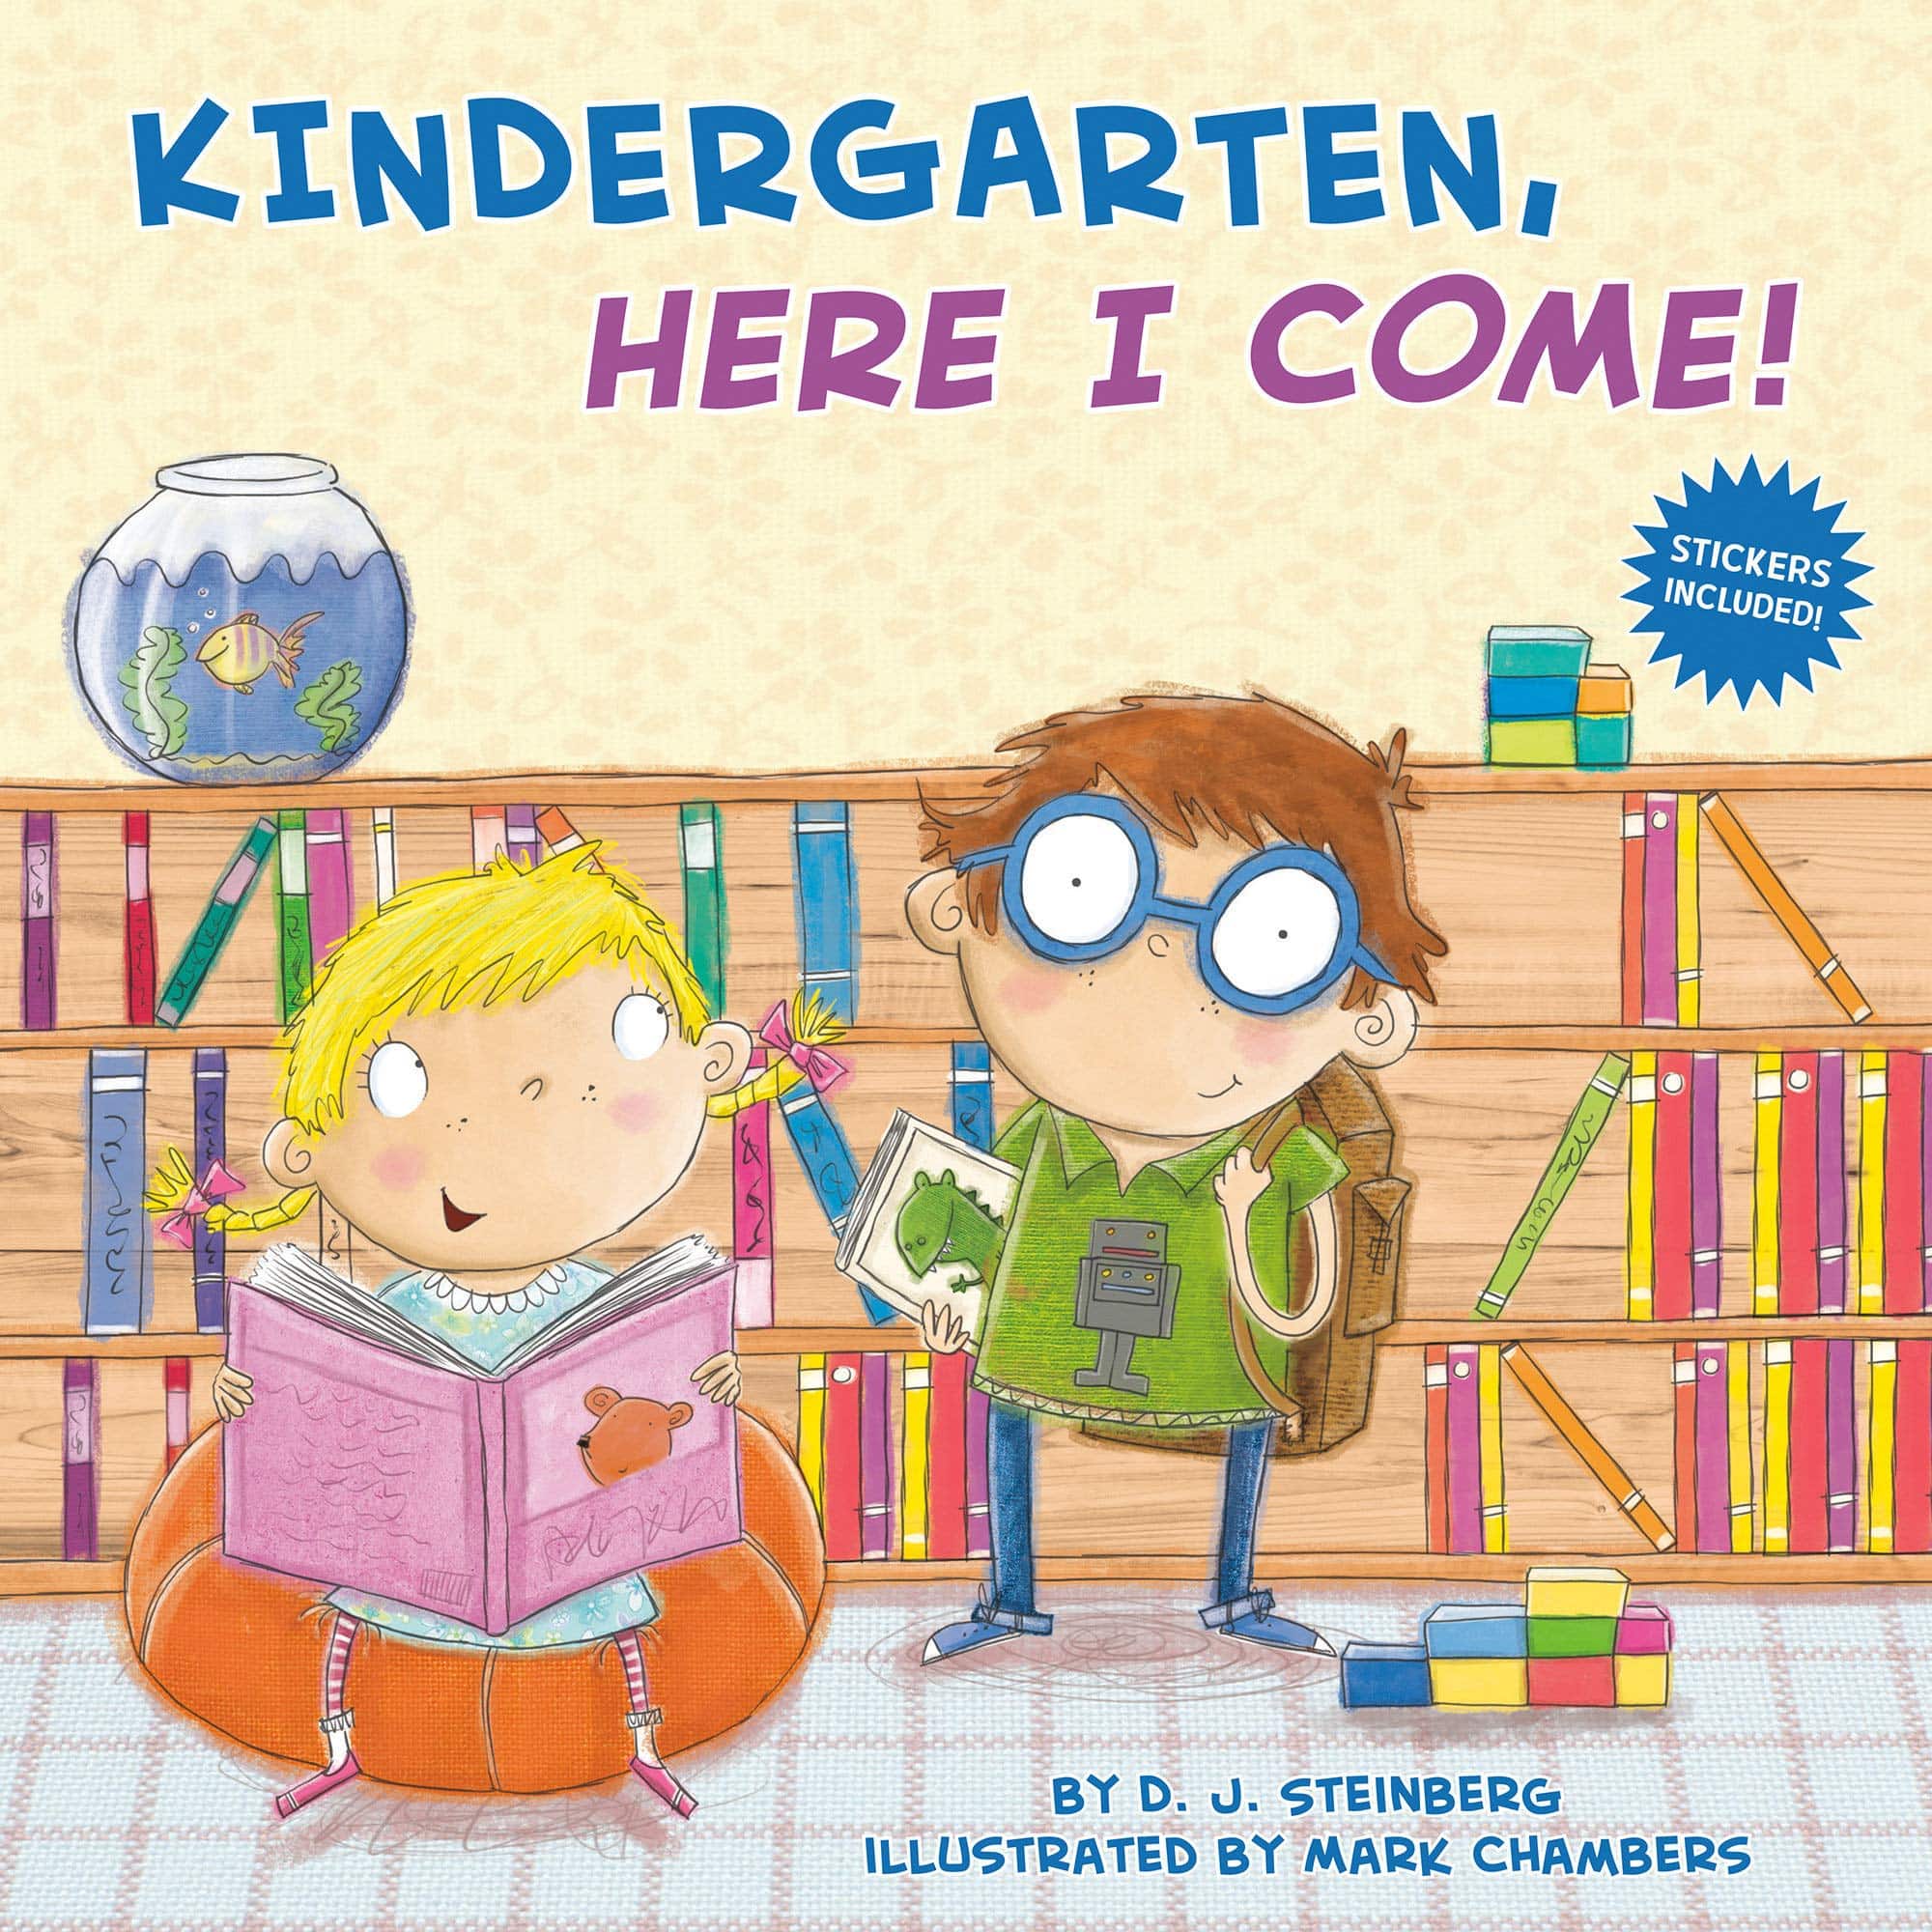 "Kindergarten, Here I Come!" by D.J. Steinberg